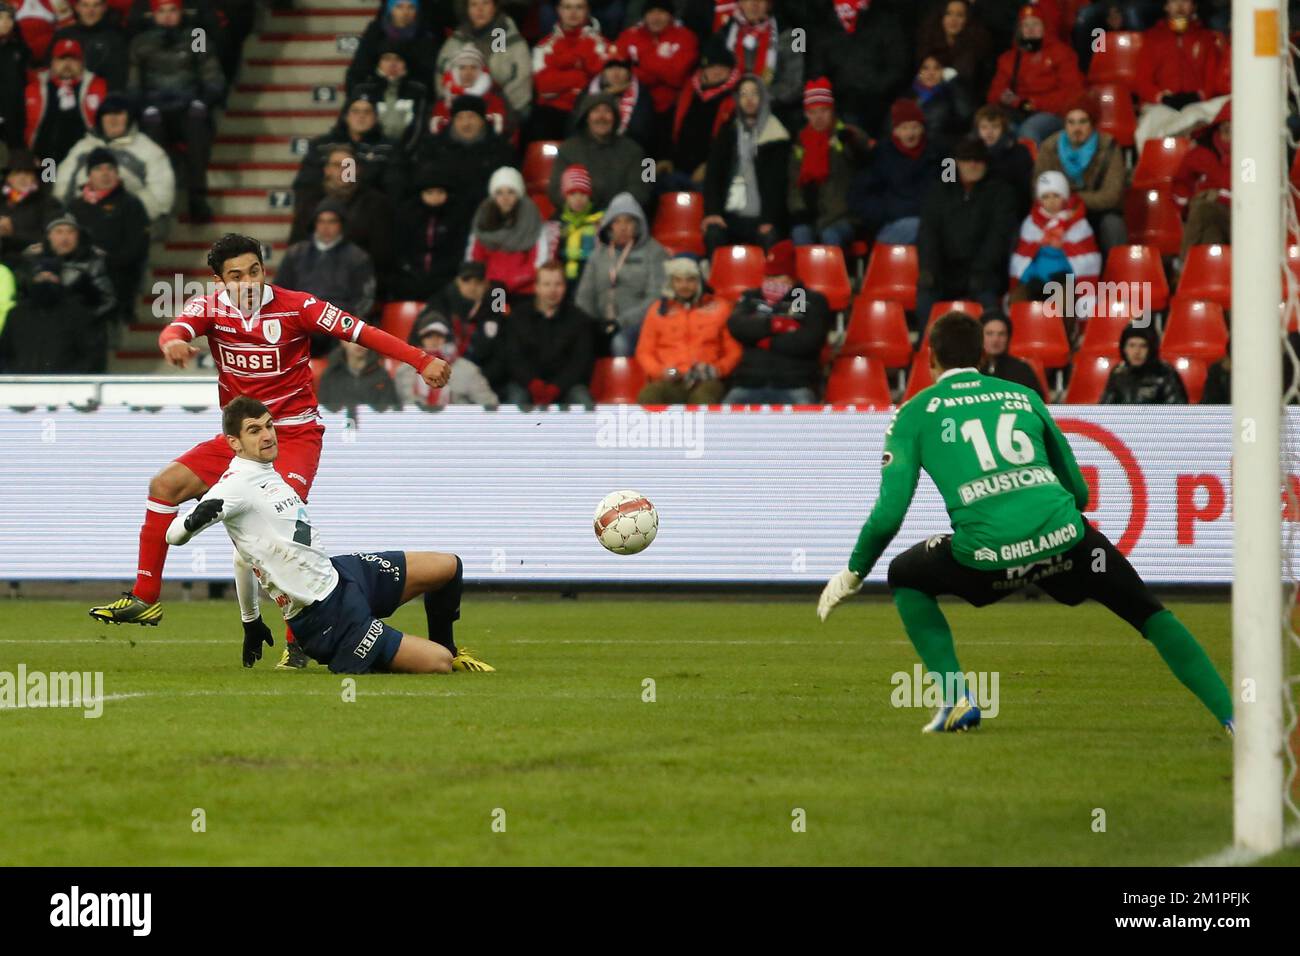 20130125 - LIEGE, BELGIUM: Standard's Reza Ghoochannejhad pictured during the Jupiler Pro League match between Standard de Liege and KV Kortrijk, in Liege, Friday 25 January 2013, on day 24 of the Belgian soccer championship. BELGA PHOTO BRUNO FAHY Stock Photo